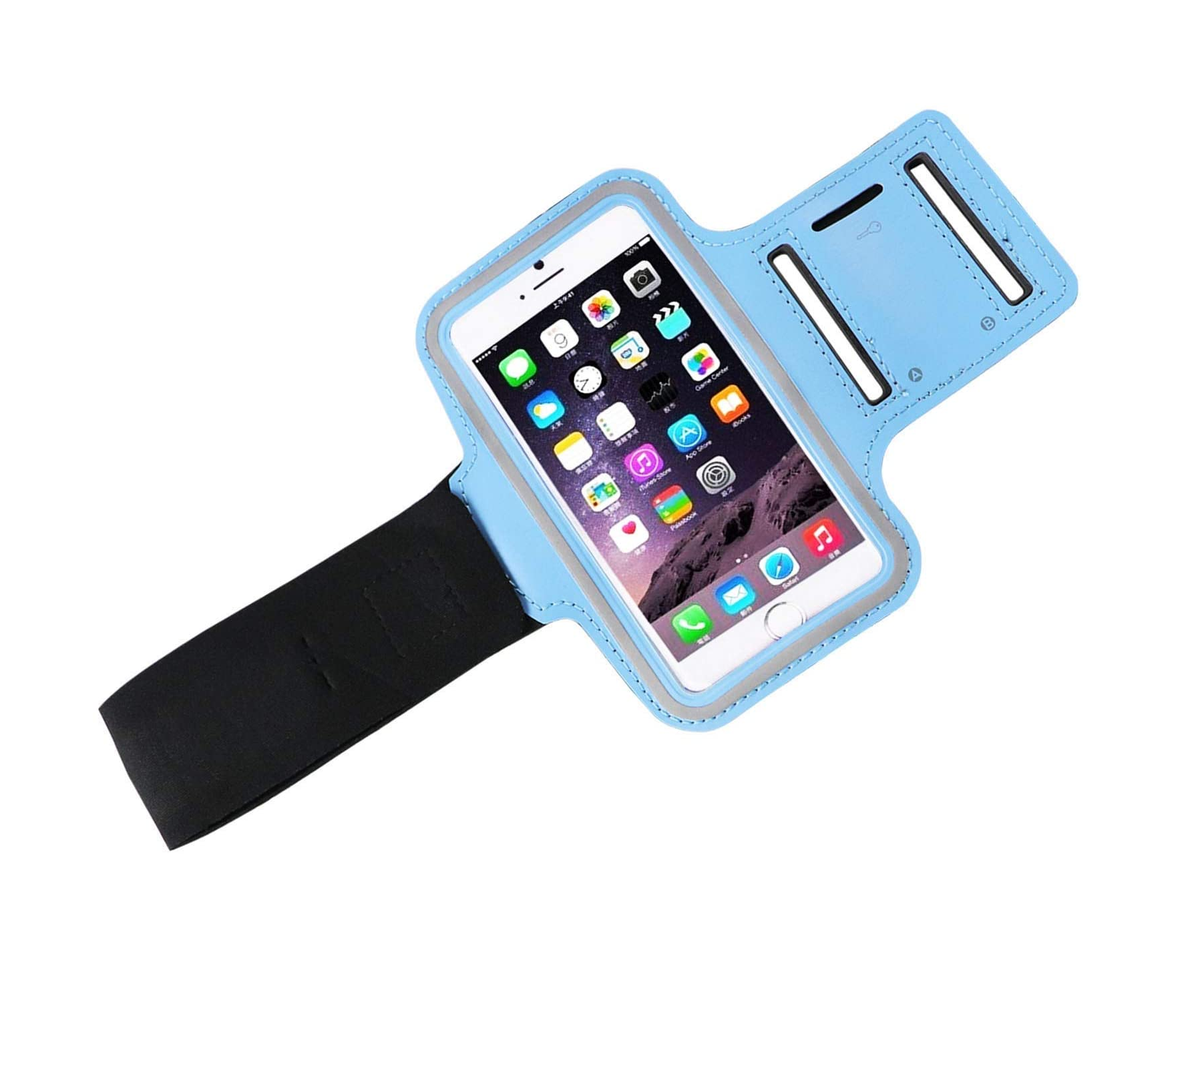 Smartphone Arm Band Large - Blue | Shop Today. Get it Tomorrow ...